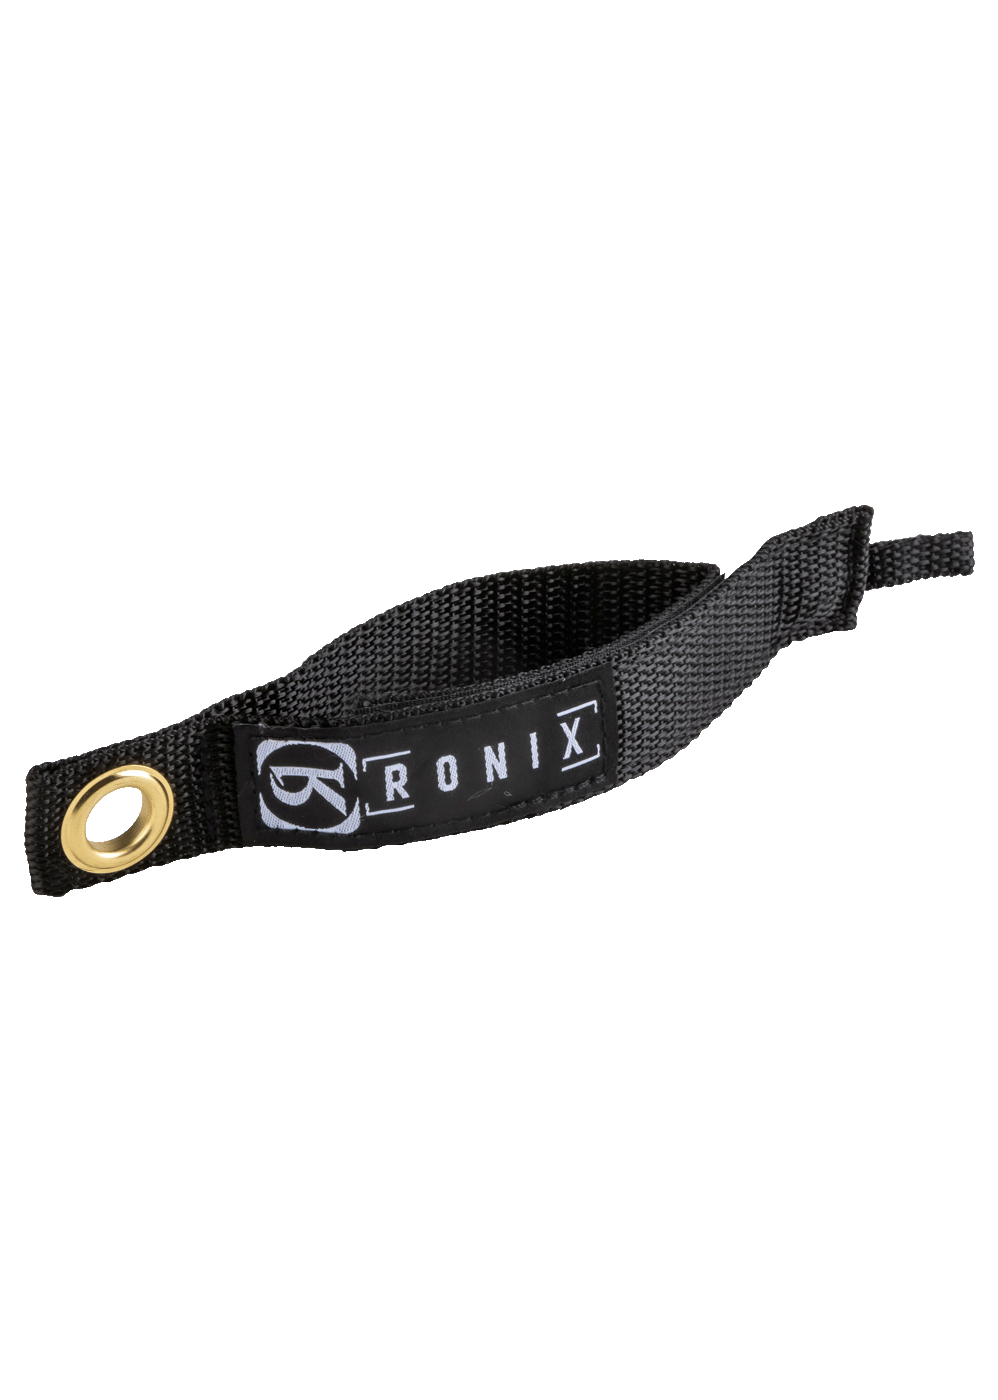 RONIX-ROPE-CADDY copy